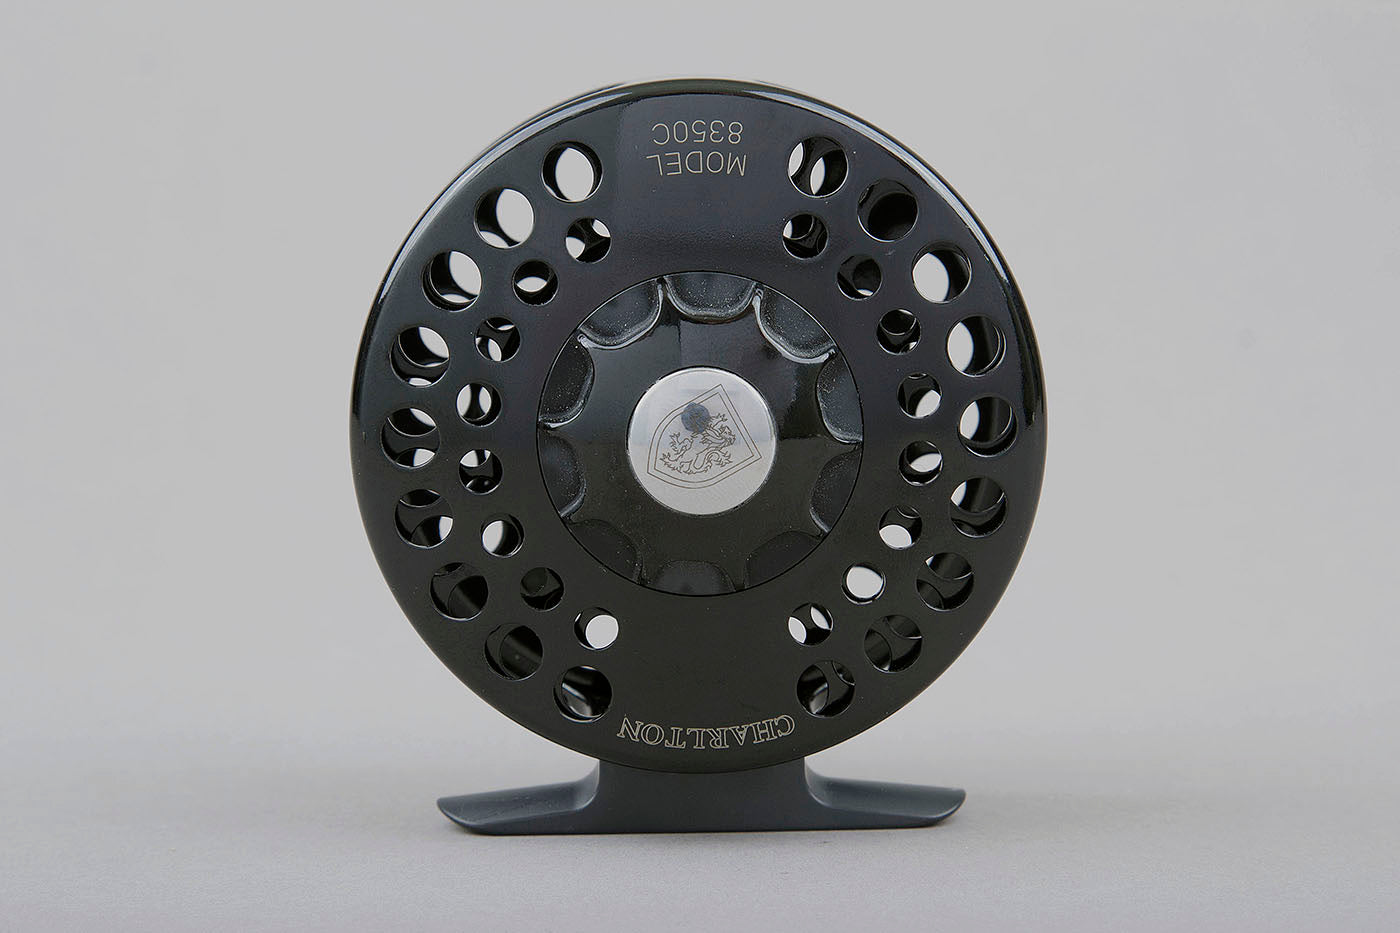 Classic Tackle Purveyor - The smallest and lightest of the Charlton Reels,  the 8350 has long been a favorite of trout fisherman for its ability to  handle lines 1-5 on one frame.